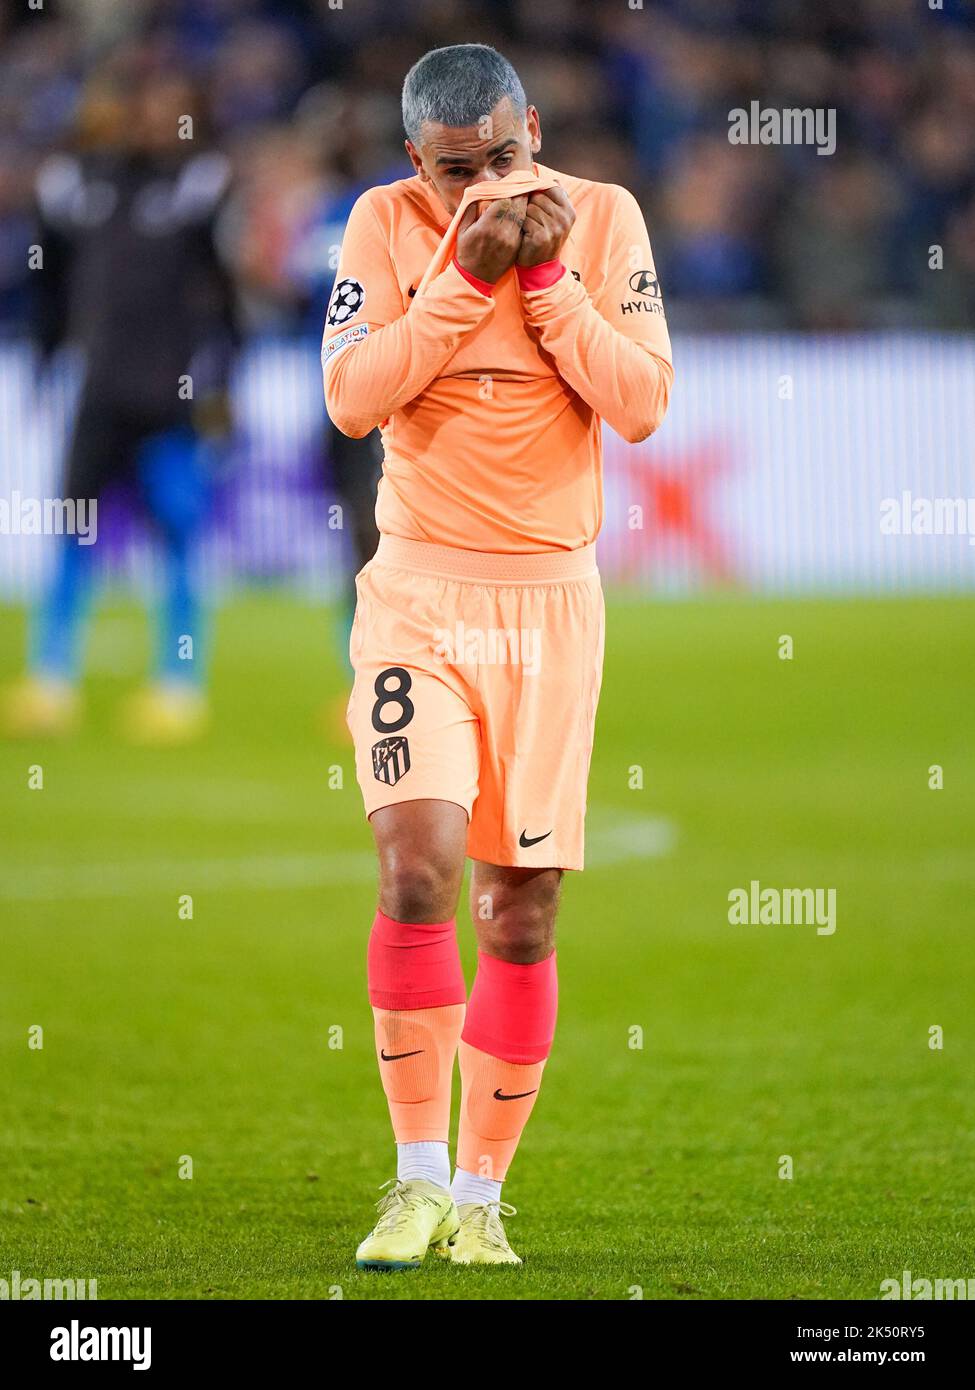 BRUGGES, BELGIUM - OCTOBER 4: Antoine Griezmann of Atletico Madrid looks dejected after the Group B - UEFA Champions League match between Club Brugge KV and Atletico Madrid at the Jan Breydelstadion on October 4, 2022 in Brugges, Belgium (Photo by Joris Verwijst/Orange Pictures) Stock Photo